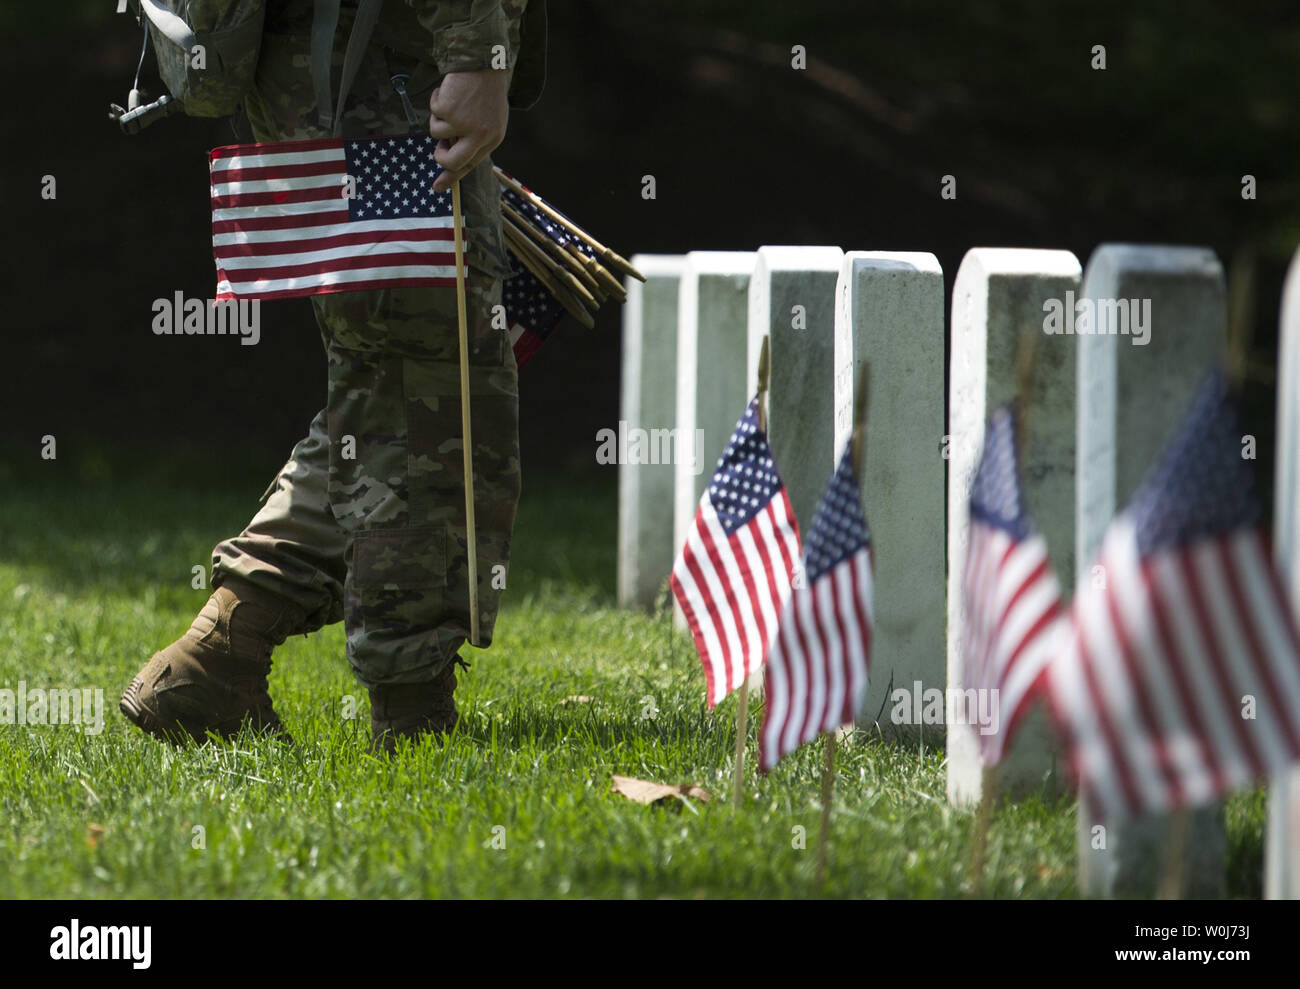 Soldiers with the U.S. Army 3rd Infantry Regiment (Old Guard) places a flag at a grave marker as part of the annual Flags-In event for Memorial Day at Arlington National Cemetery in Arlington, Virginia on May 26, 2016. Members of The Old Guard placed an America flag at more than 230,000 grave markers at Arlington in honor of of Nation's fallen military members. The tradition has been conducted since 1948. Photo by Kevin Dietsch/UPI Stock Photo